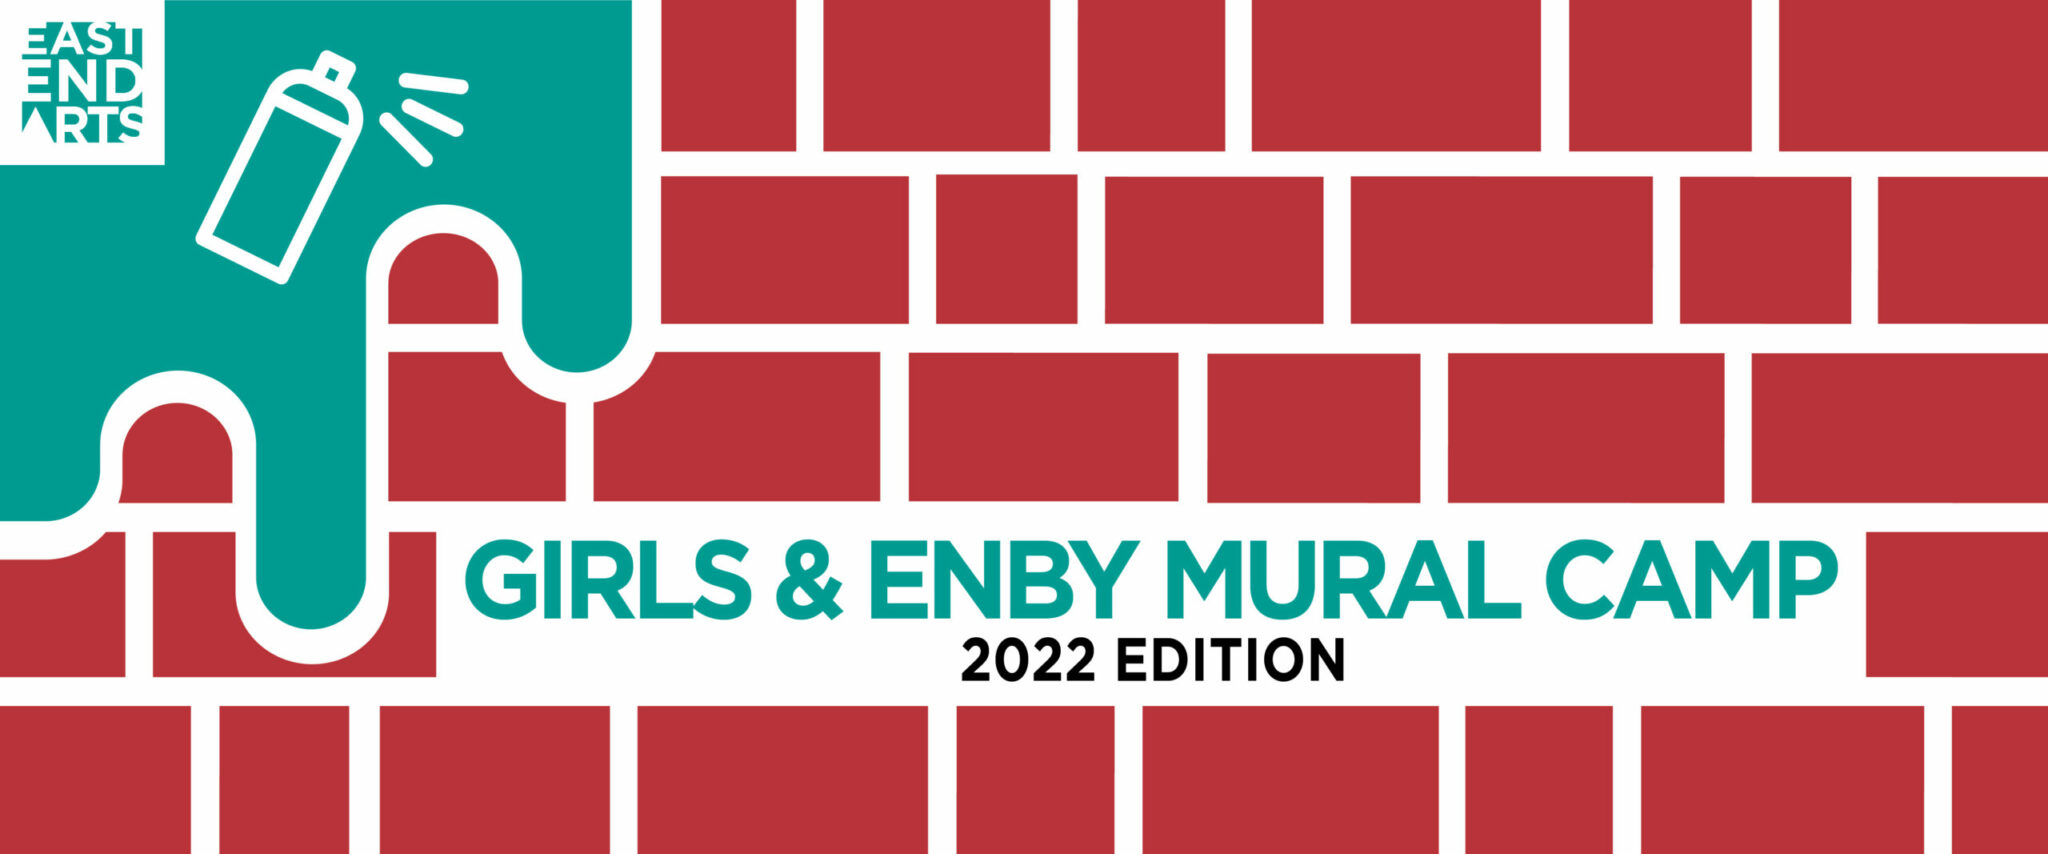 A banner graphic resembling a brick wall. It has a dripping paint motif in the top left corner. It reads in teal text across the midde: "Girls & Enby Mural Camp 2022 Edition".